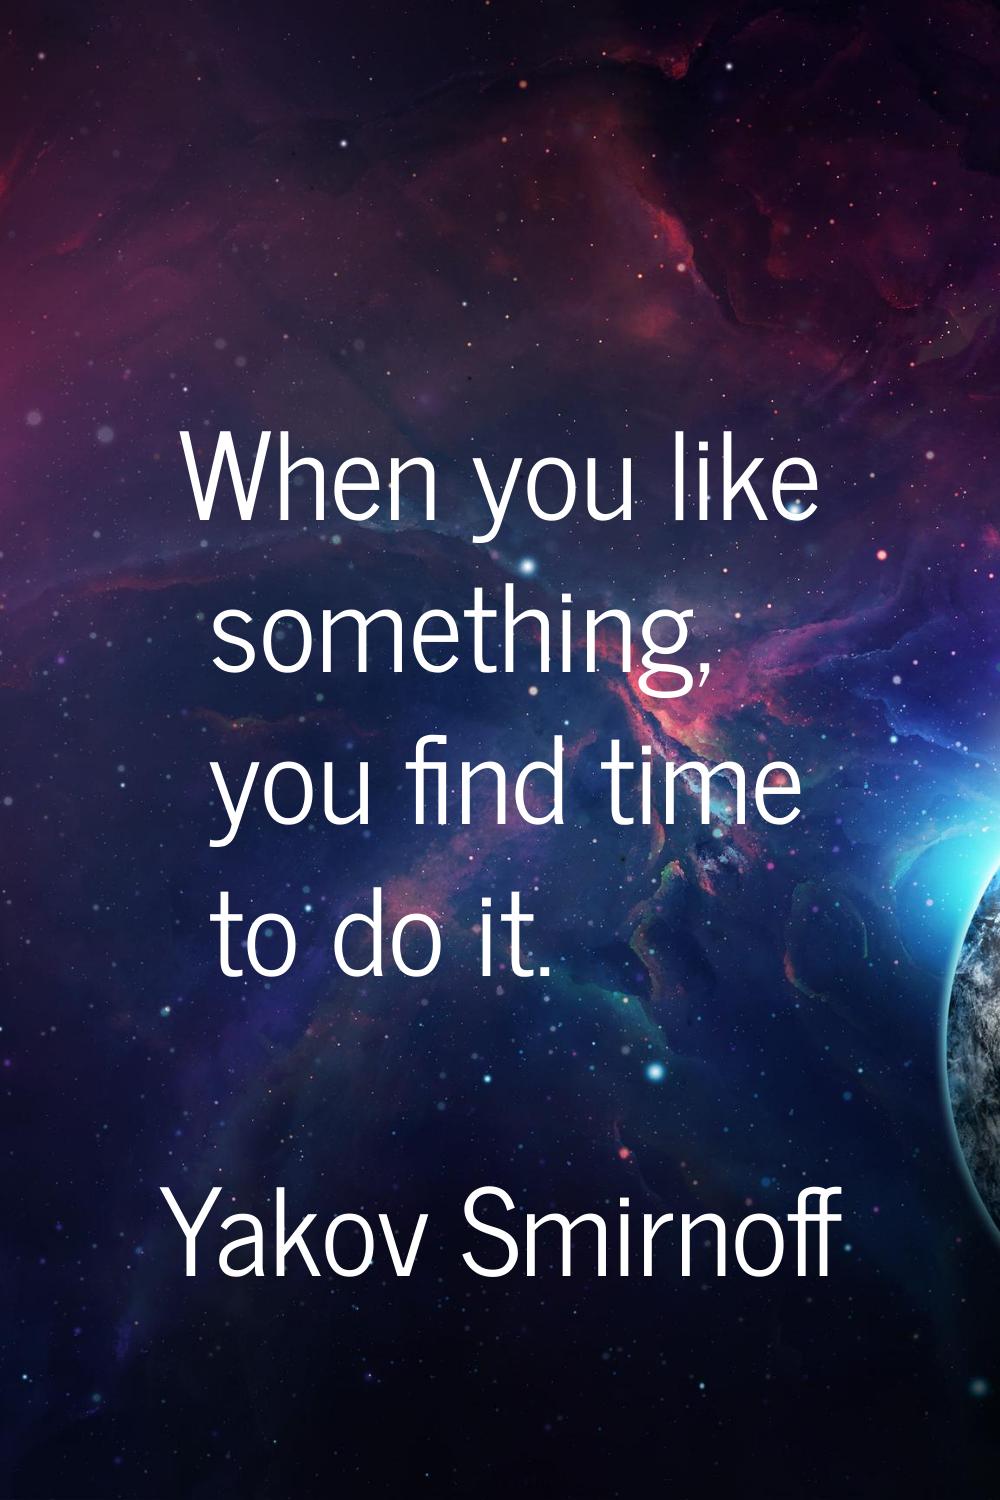 When you like something, you find time to do it.